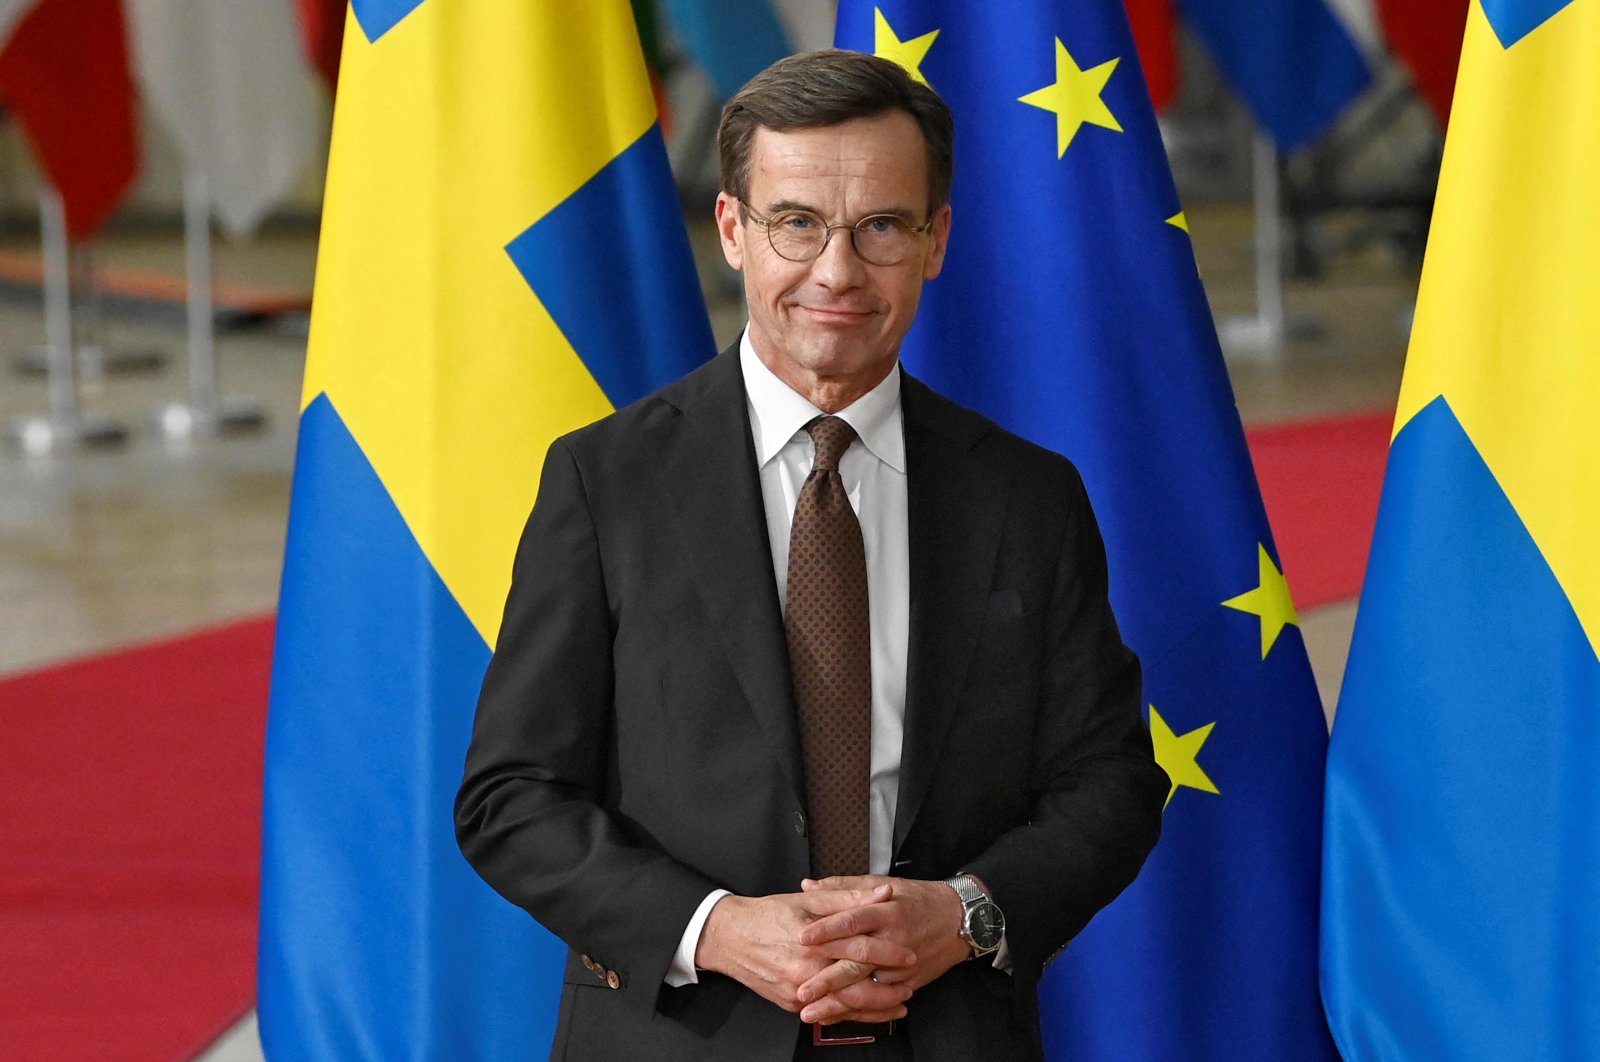 Sweden&#039;s Prime Minister Ulf Kristersson poses as he arrives for the first day of the EU leaders Summit at The European Council Building in Brussels, Belgium, Oct. 20, 2022. (AFP Photo)